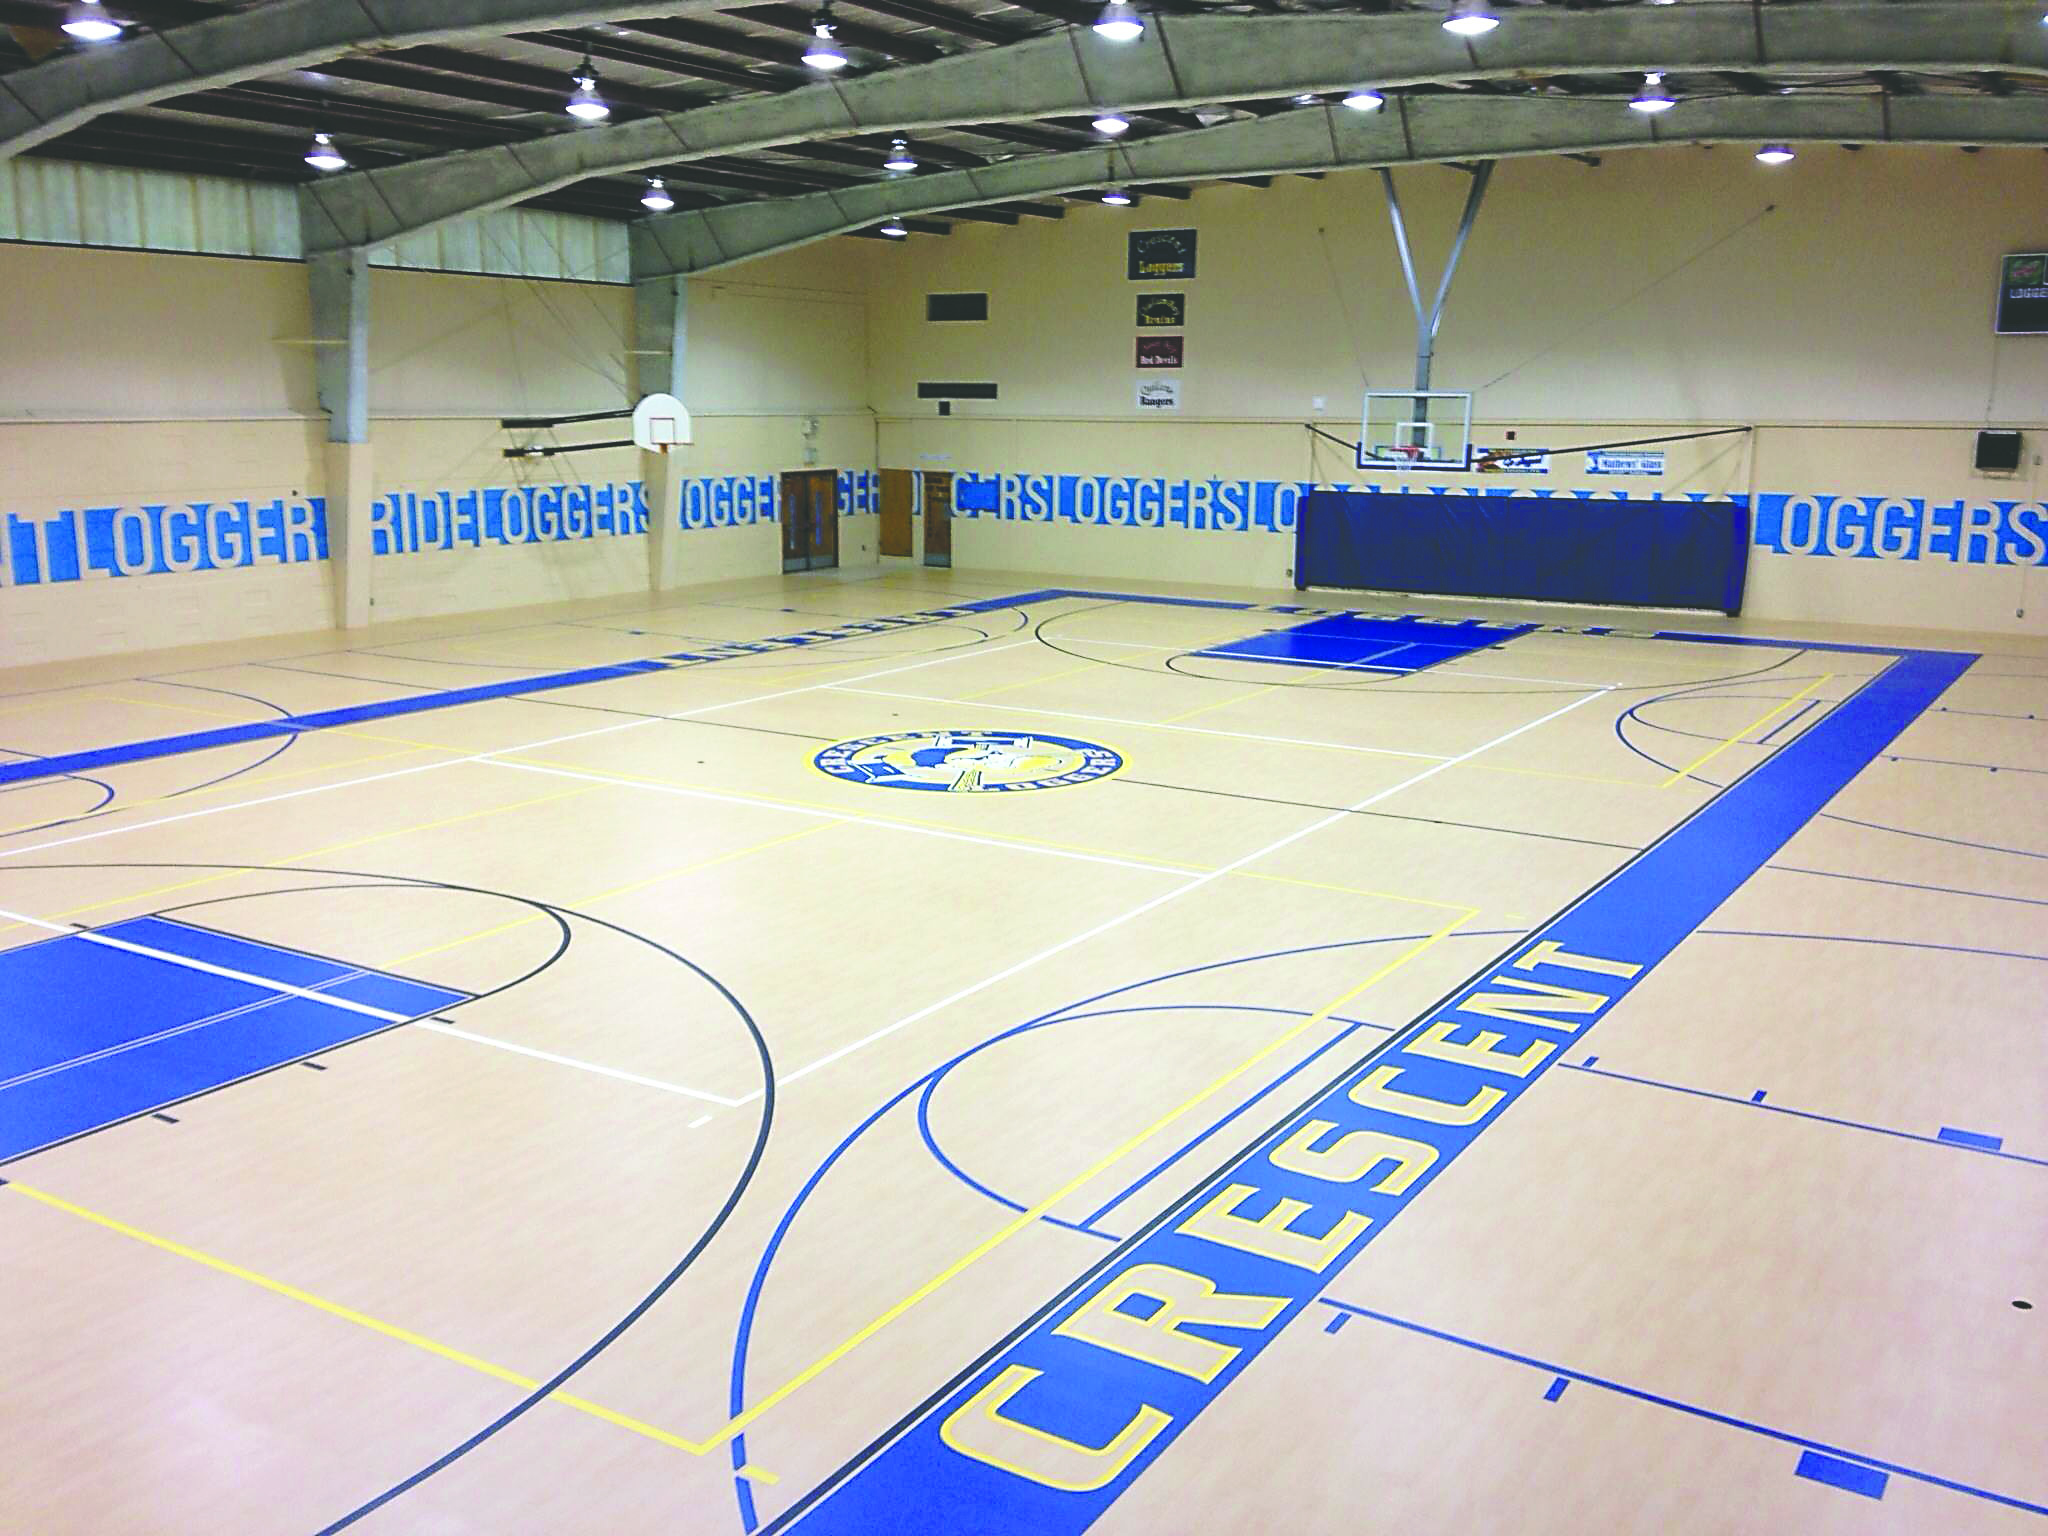 The renovated Crescent school gymnasium will host its first high school athletic event Tuesday when the Loggers play Neah Bay.